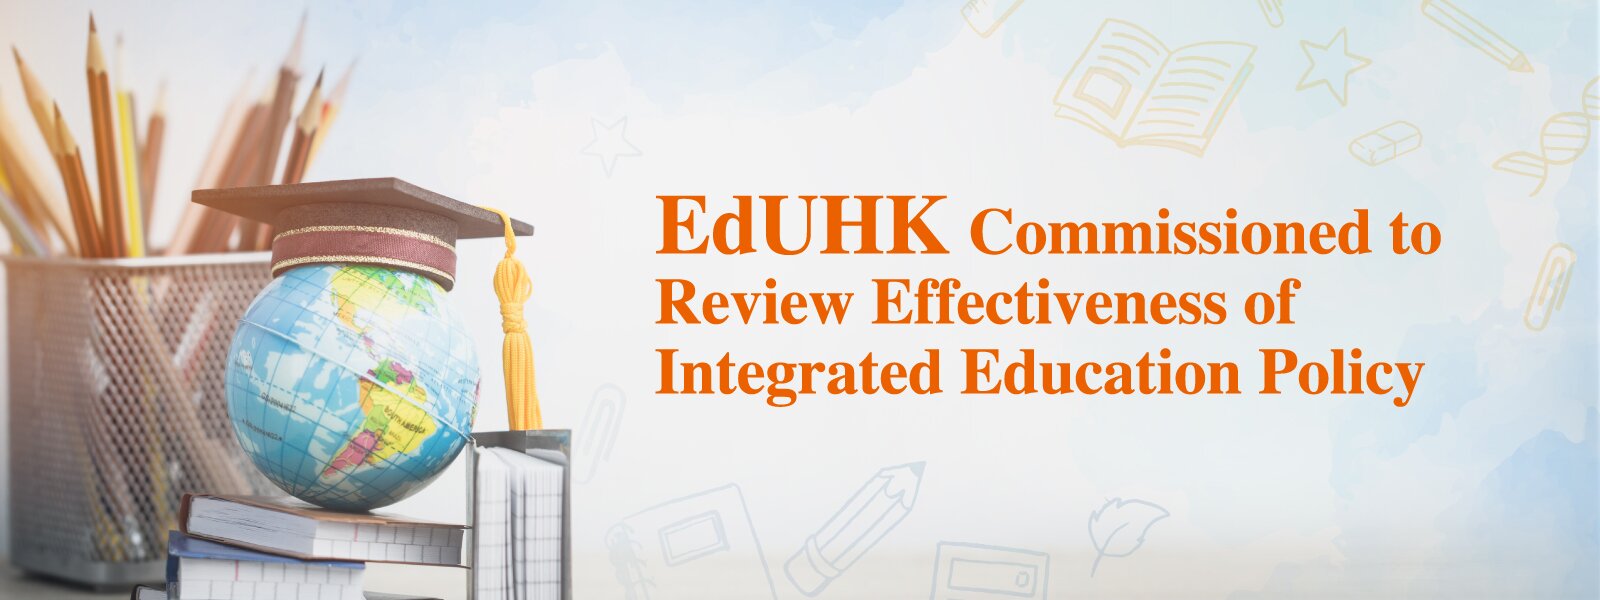 EdUHK Commissioned to Review Effectiveness of Integrated Education Policy